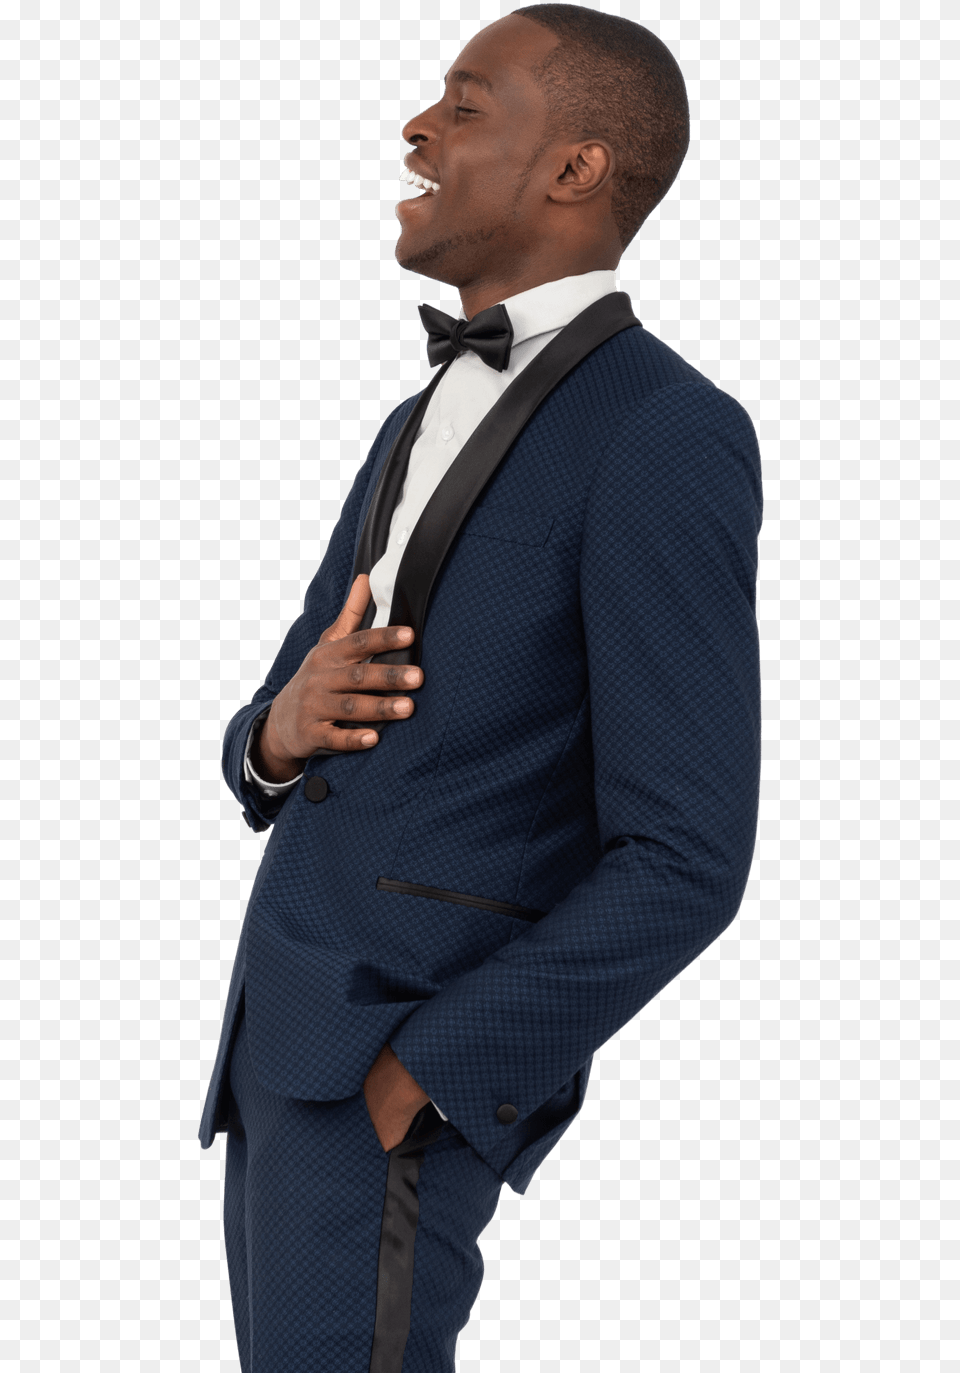 Men Full Man Standing And Laughing, Tuxedo, Clothing, Suit, Formal Wear Png Image